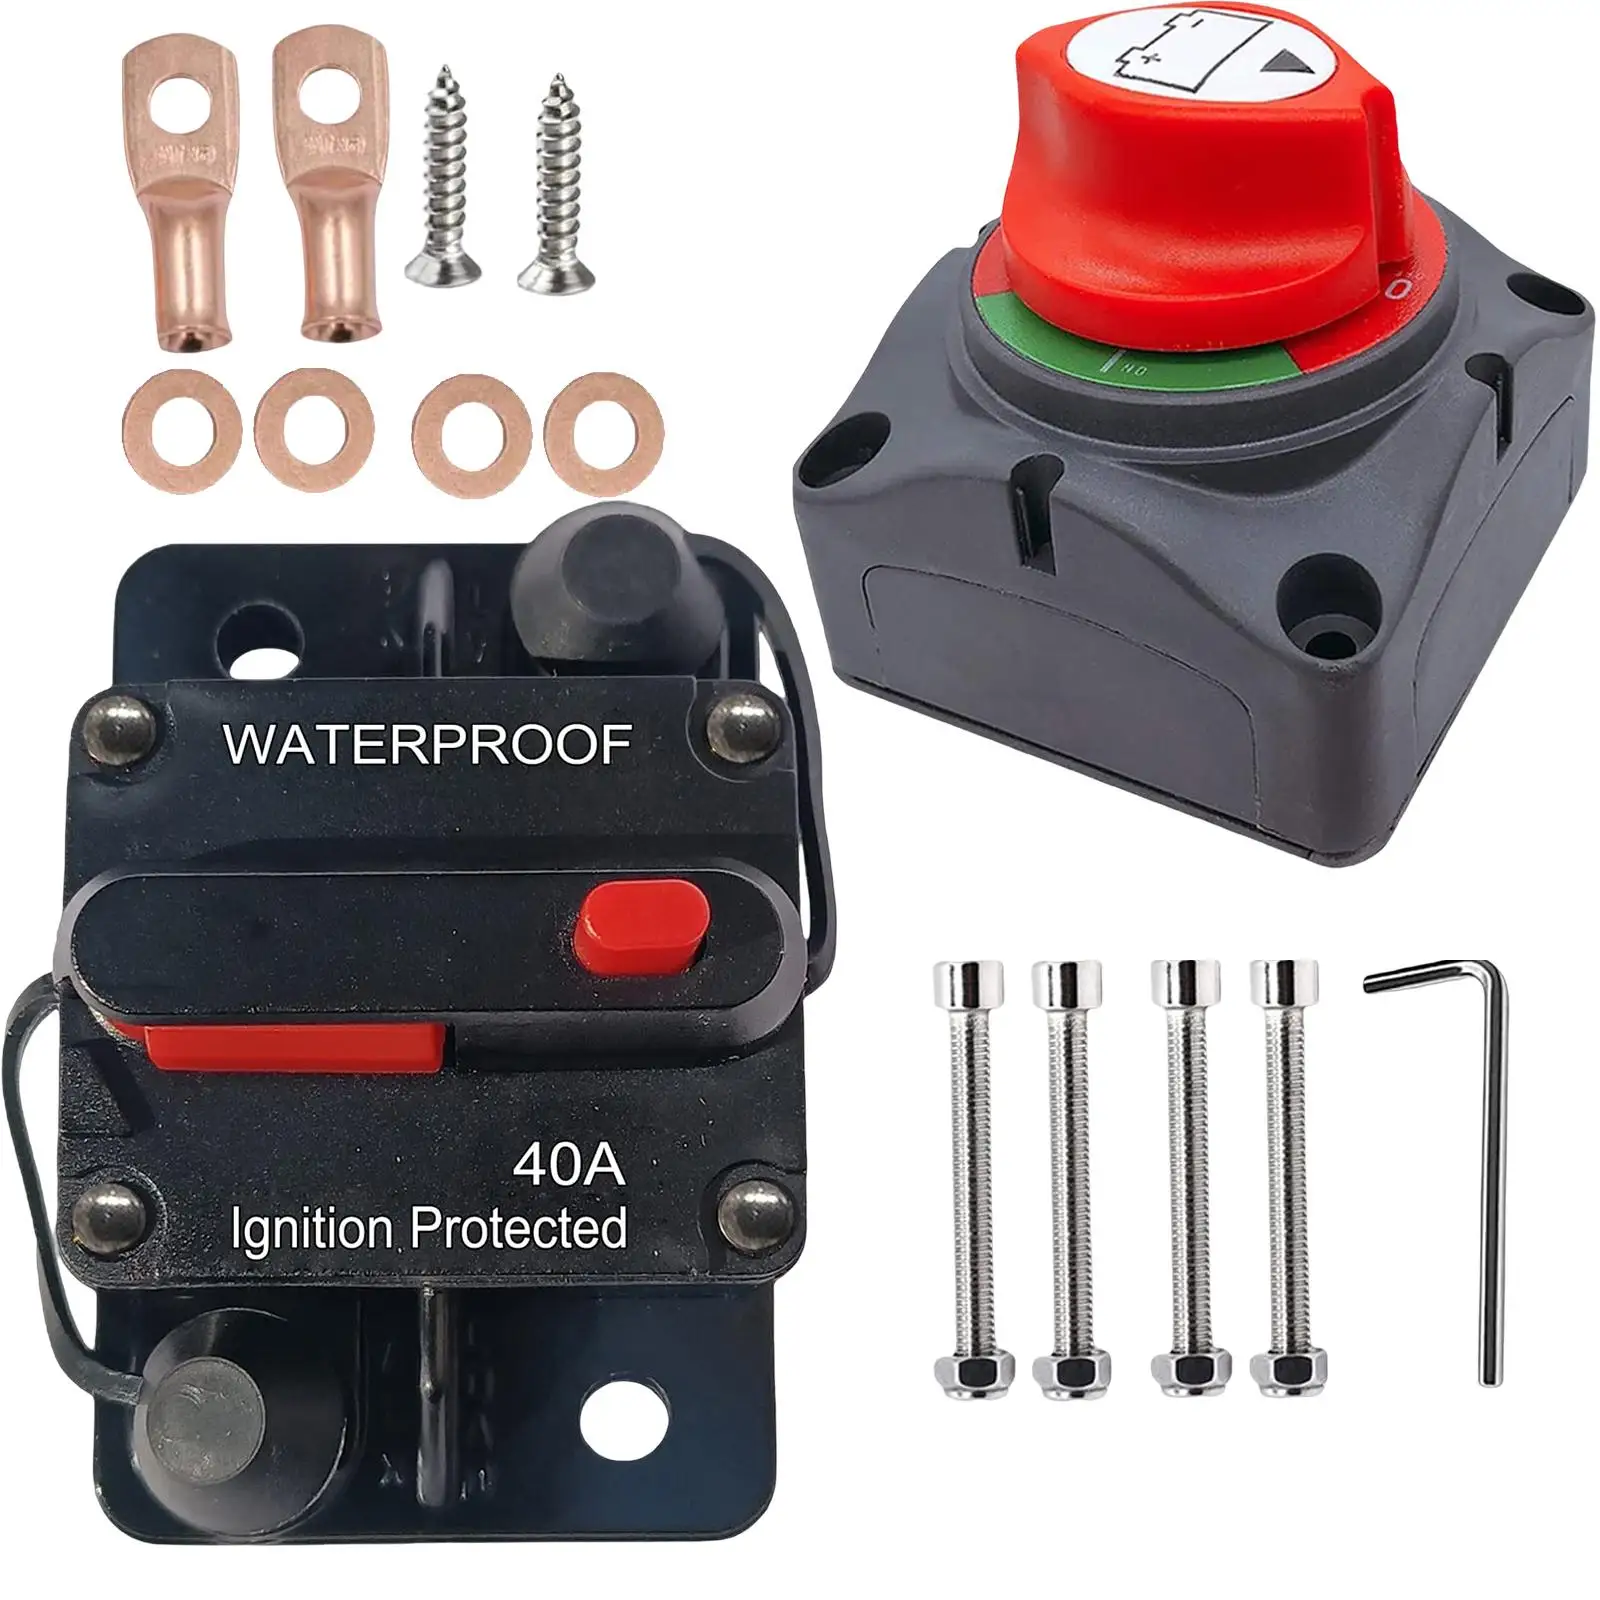 40 Amp Circuit Breaker with Wire Lugs Resettable Fuse Manual Reset Button Switch Fuses for Vehicles System Protection ATV